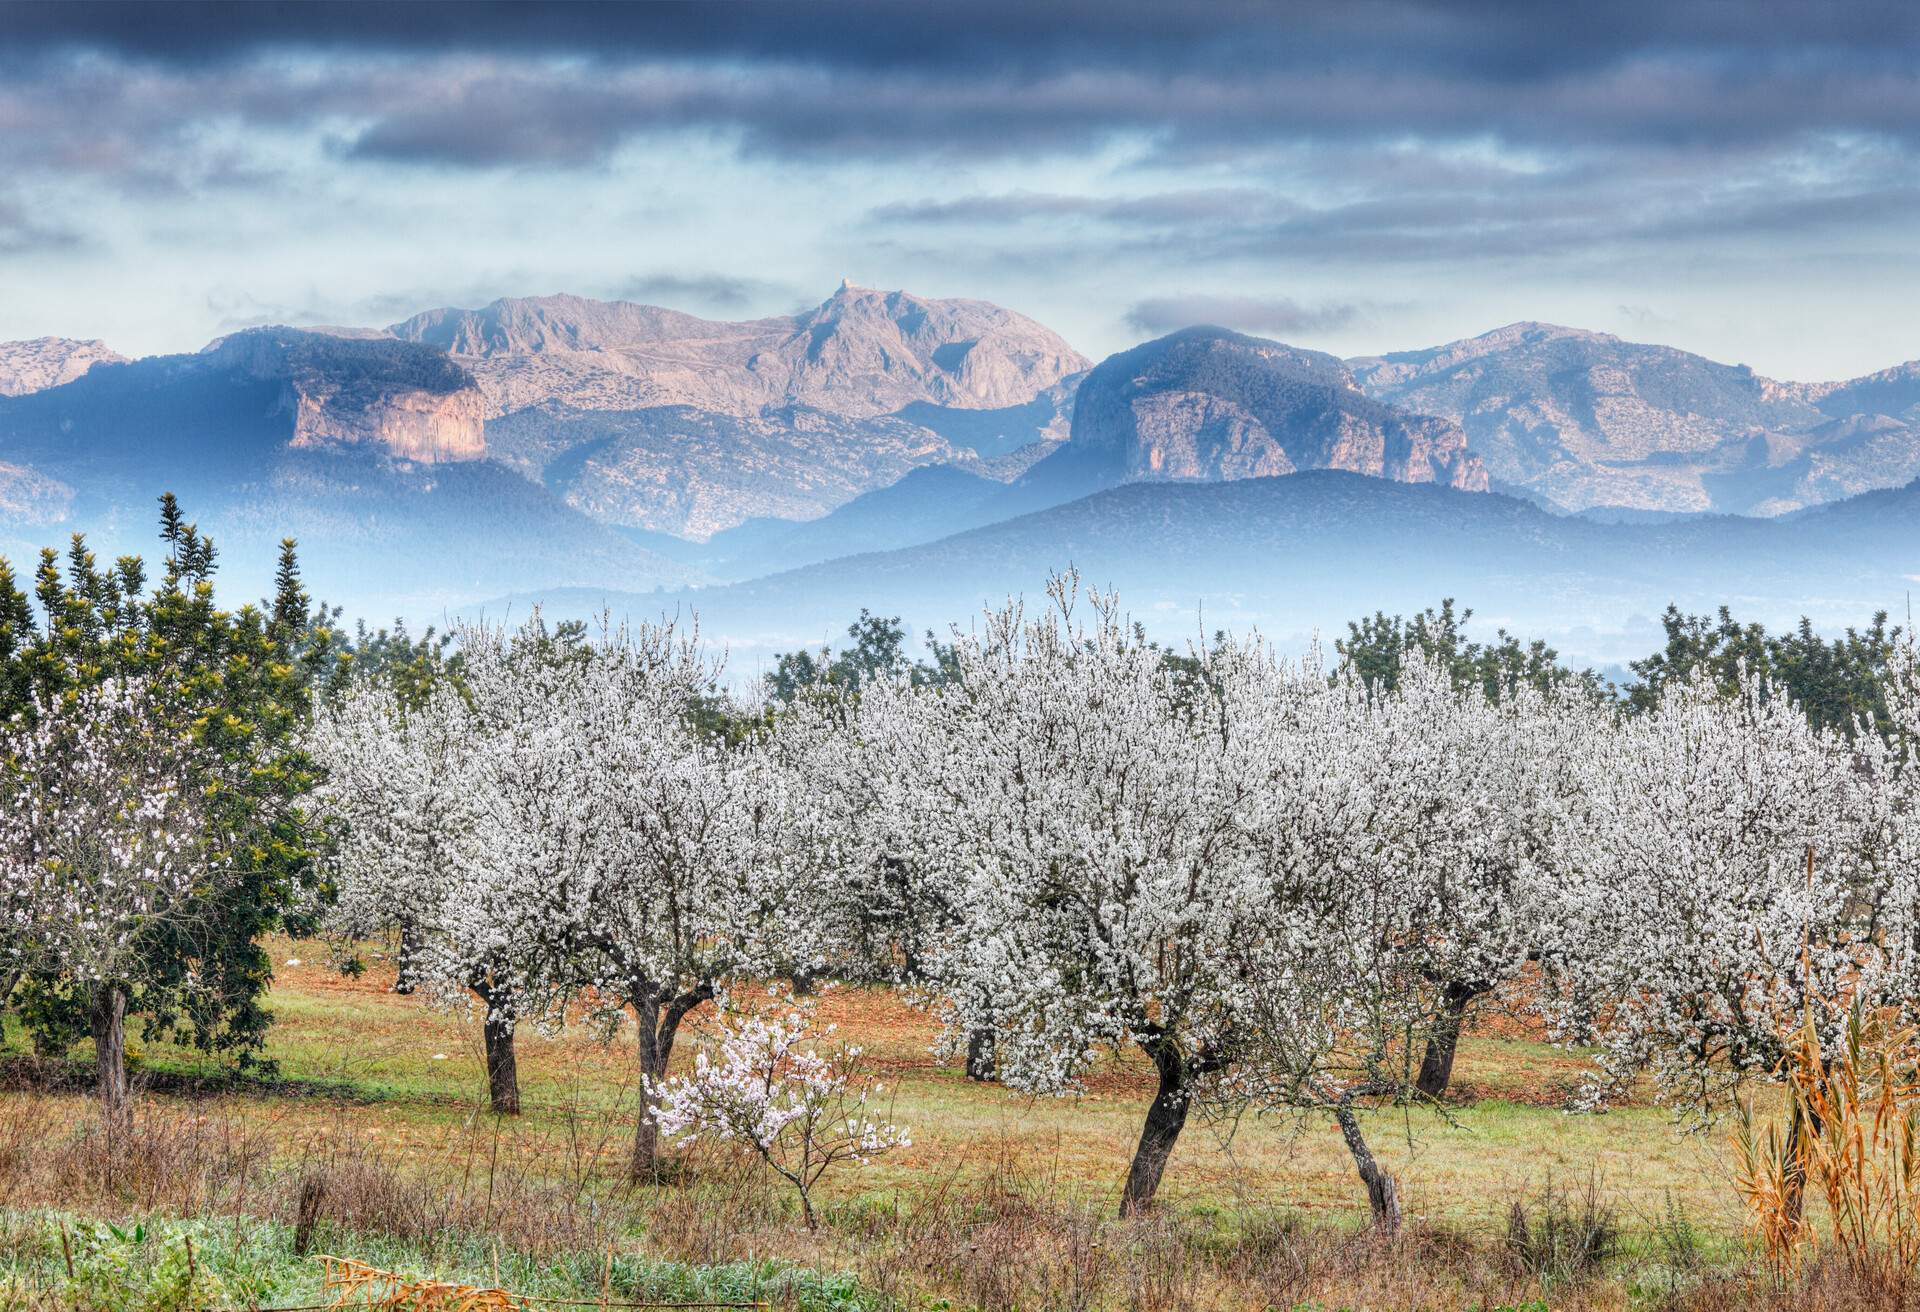 DEST-SPAIN_MALLORCA_ALMOND_TREES_SPRING_BLOOM_GettyImages-116379141